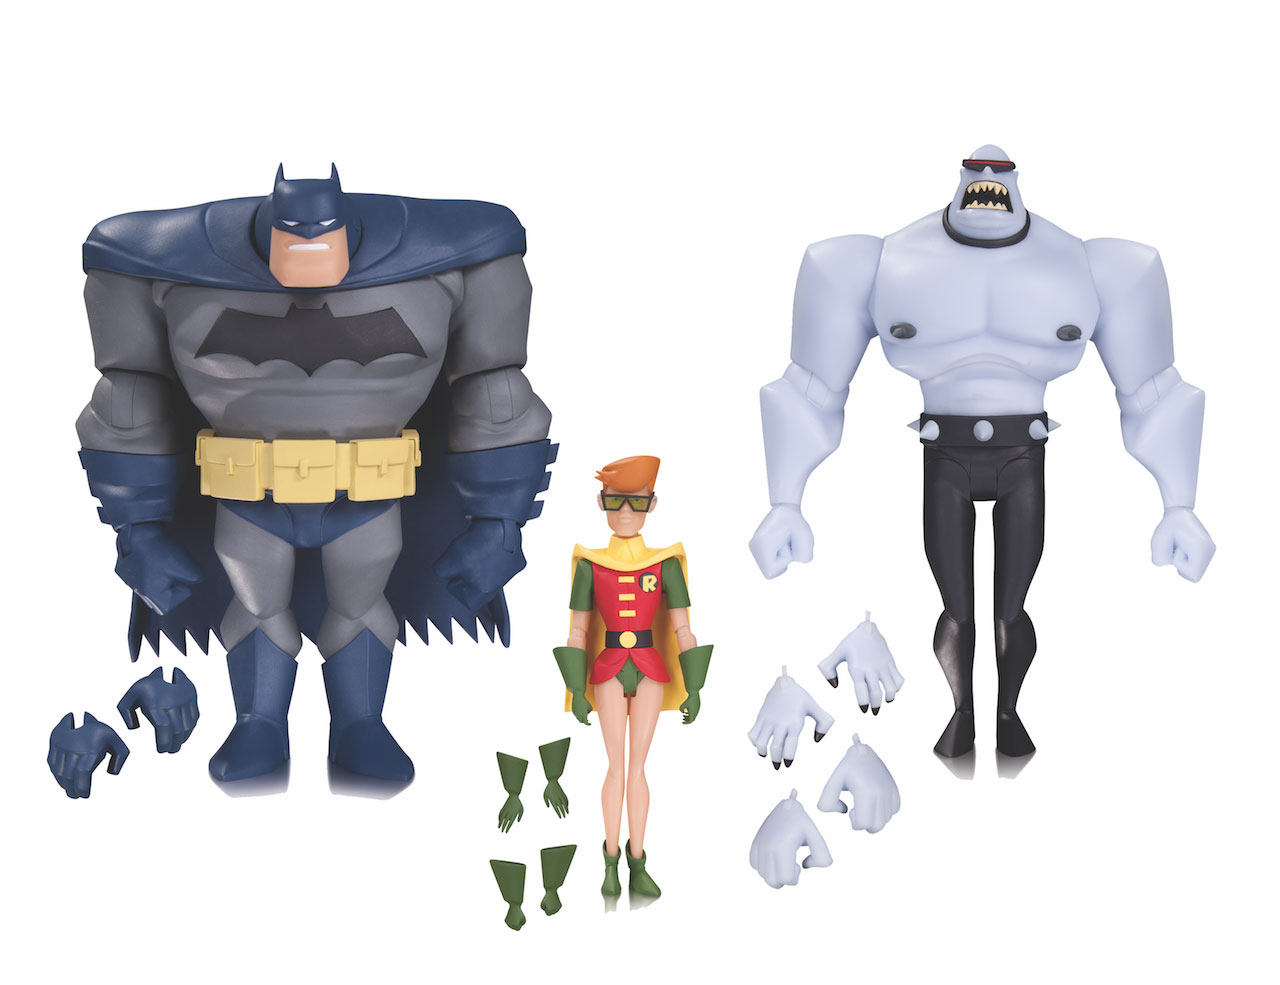 BATMAN: THE ANIMATED SERIES BATMAN, ROBIN AND MUTANT LEADER ACTION FIGURE 3-PACK 